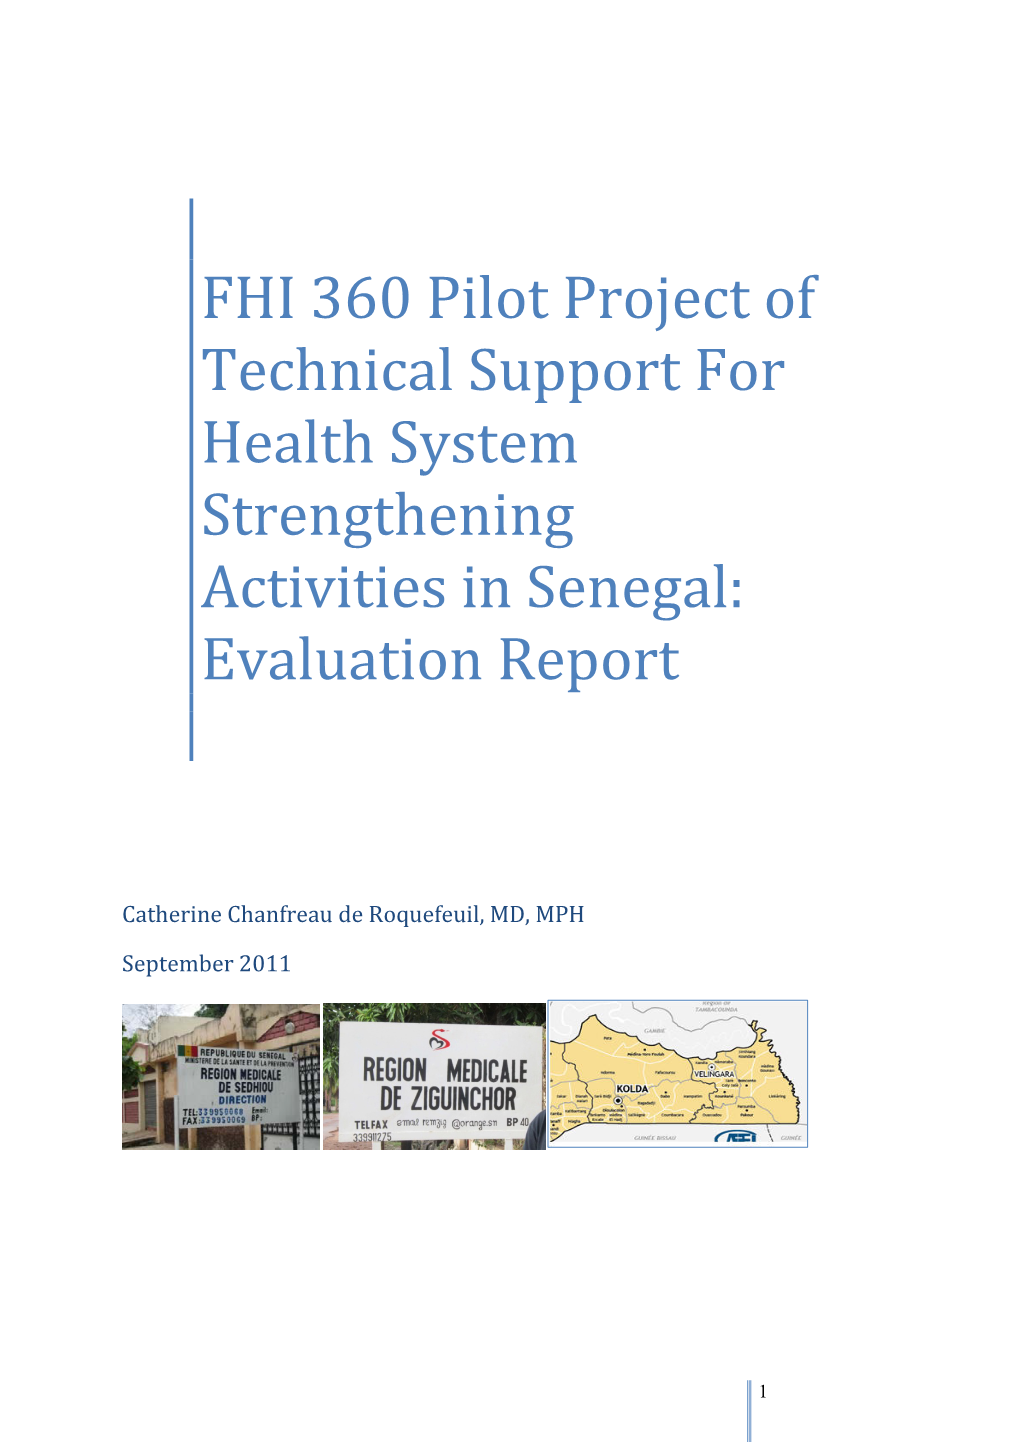 FHI 360 Pilot Project of Technical Support for Health System